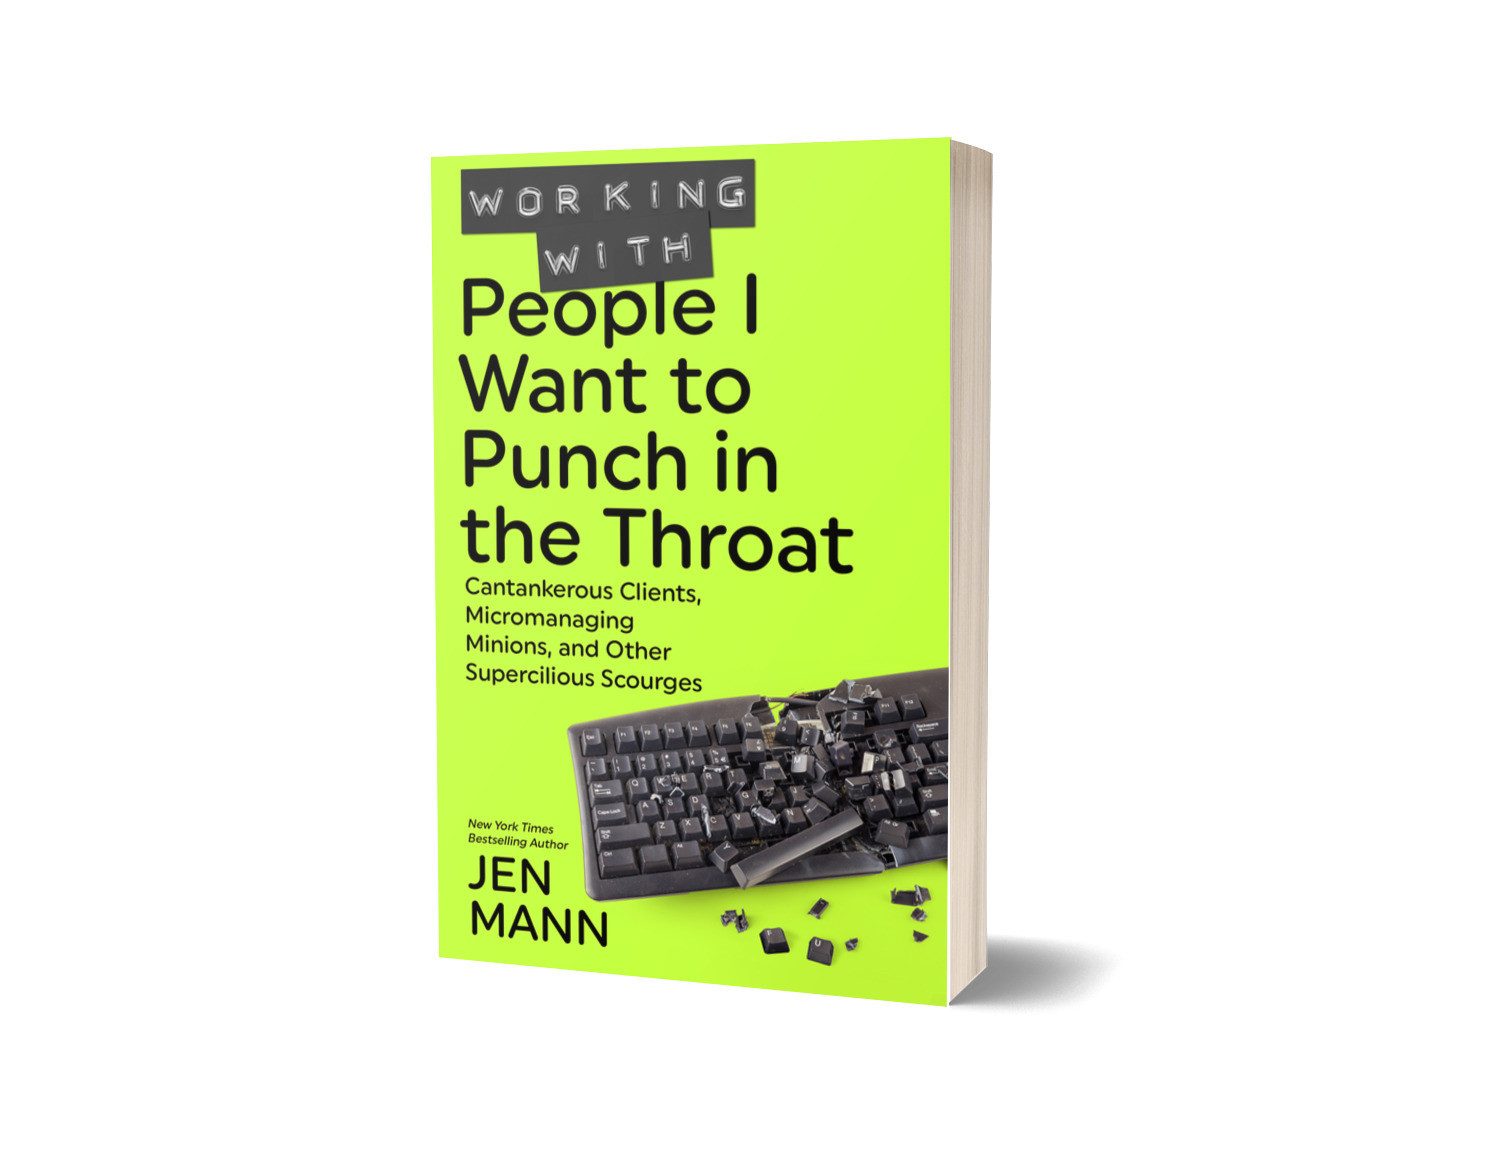 Working with People I Want to Punch in the Throat: Cantankerous Clients, Micromanaging Minions, and Other Supercilious Scourges - Signed Copy